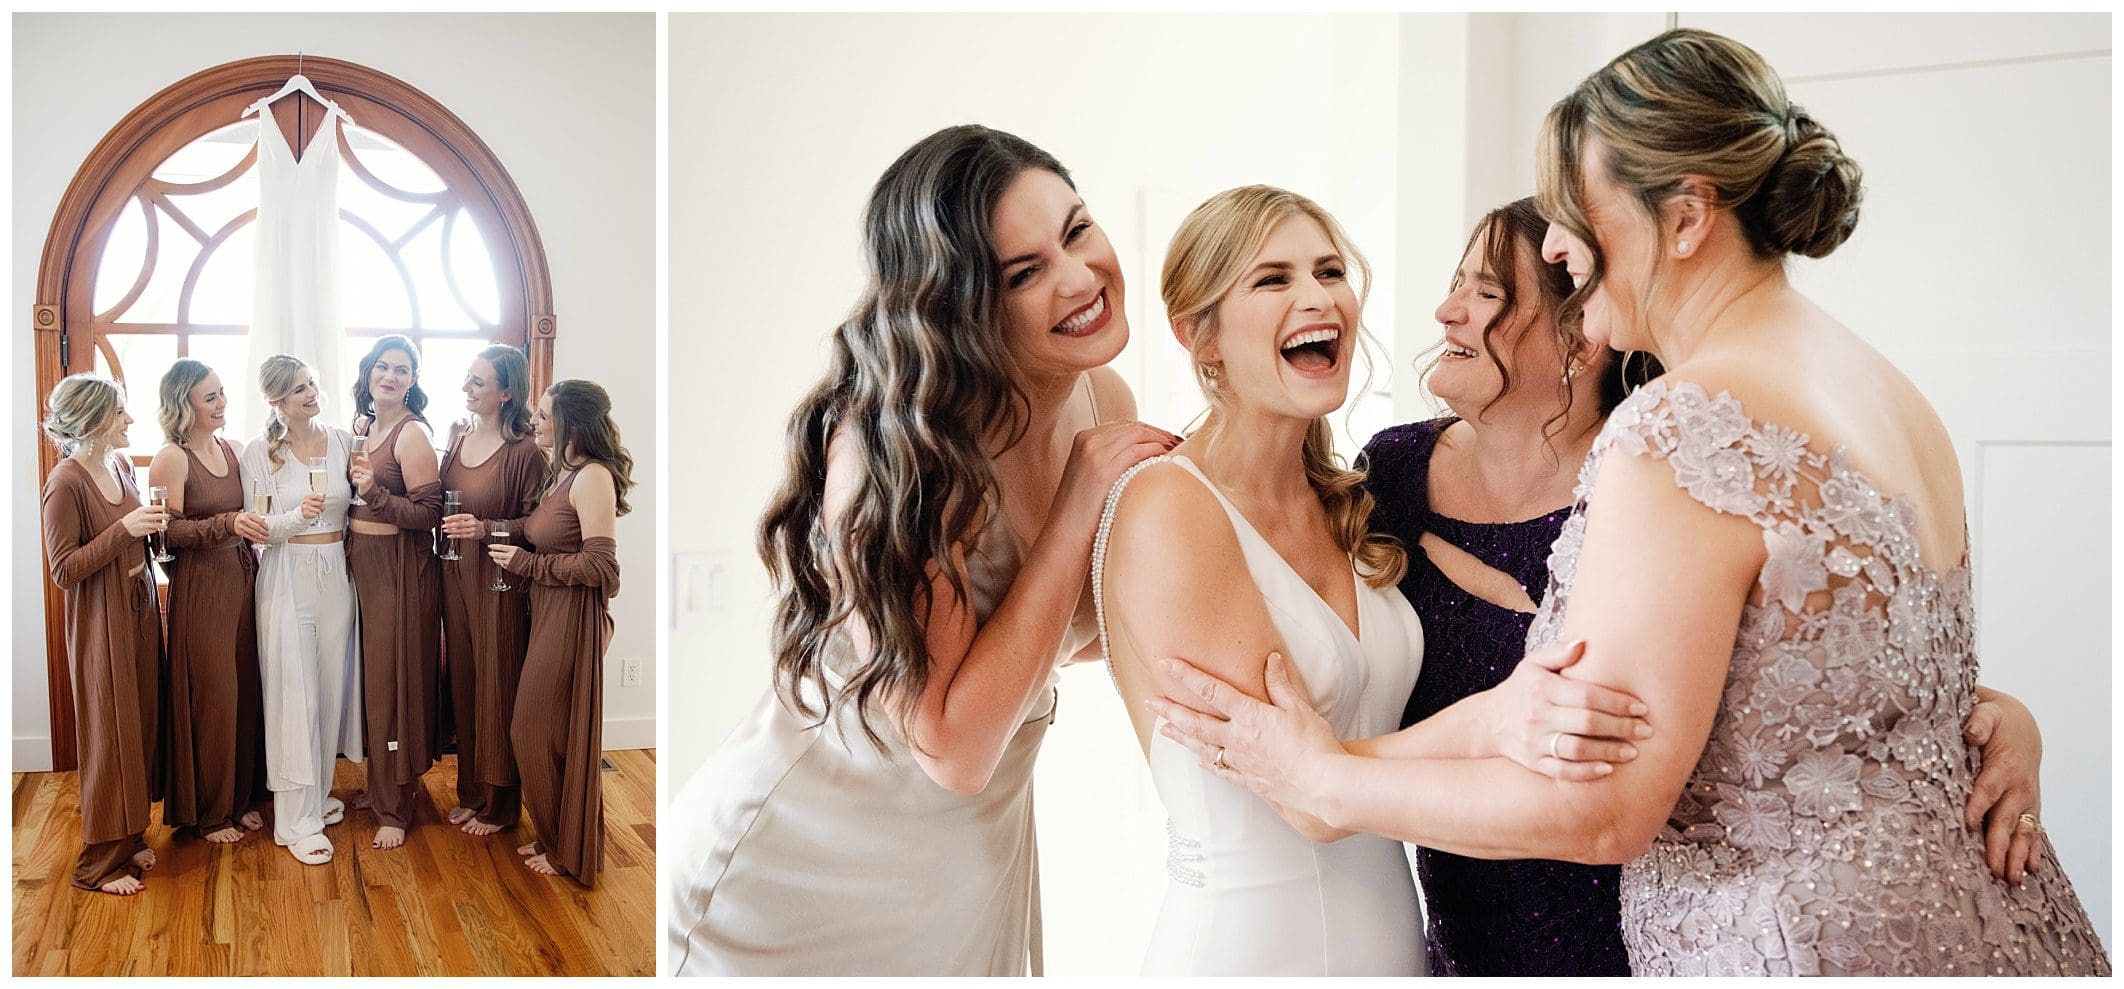 A bride and her bridesmaids laughing during a fall wedding at Crest Center, with a beautiful window backdrop.